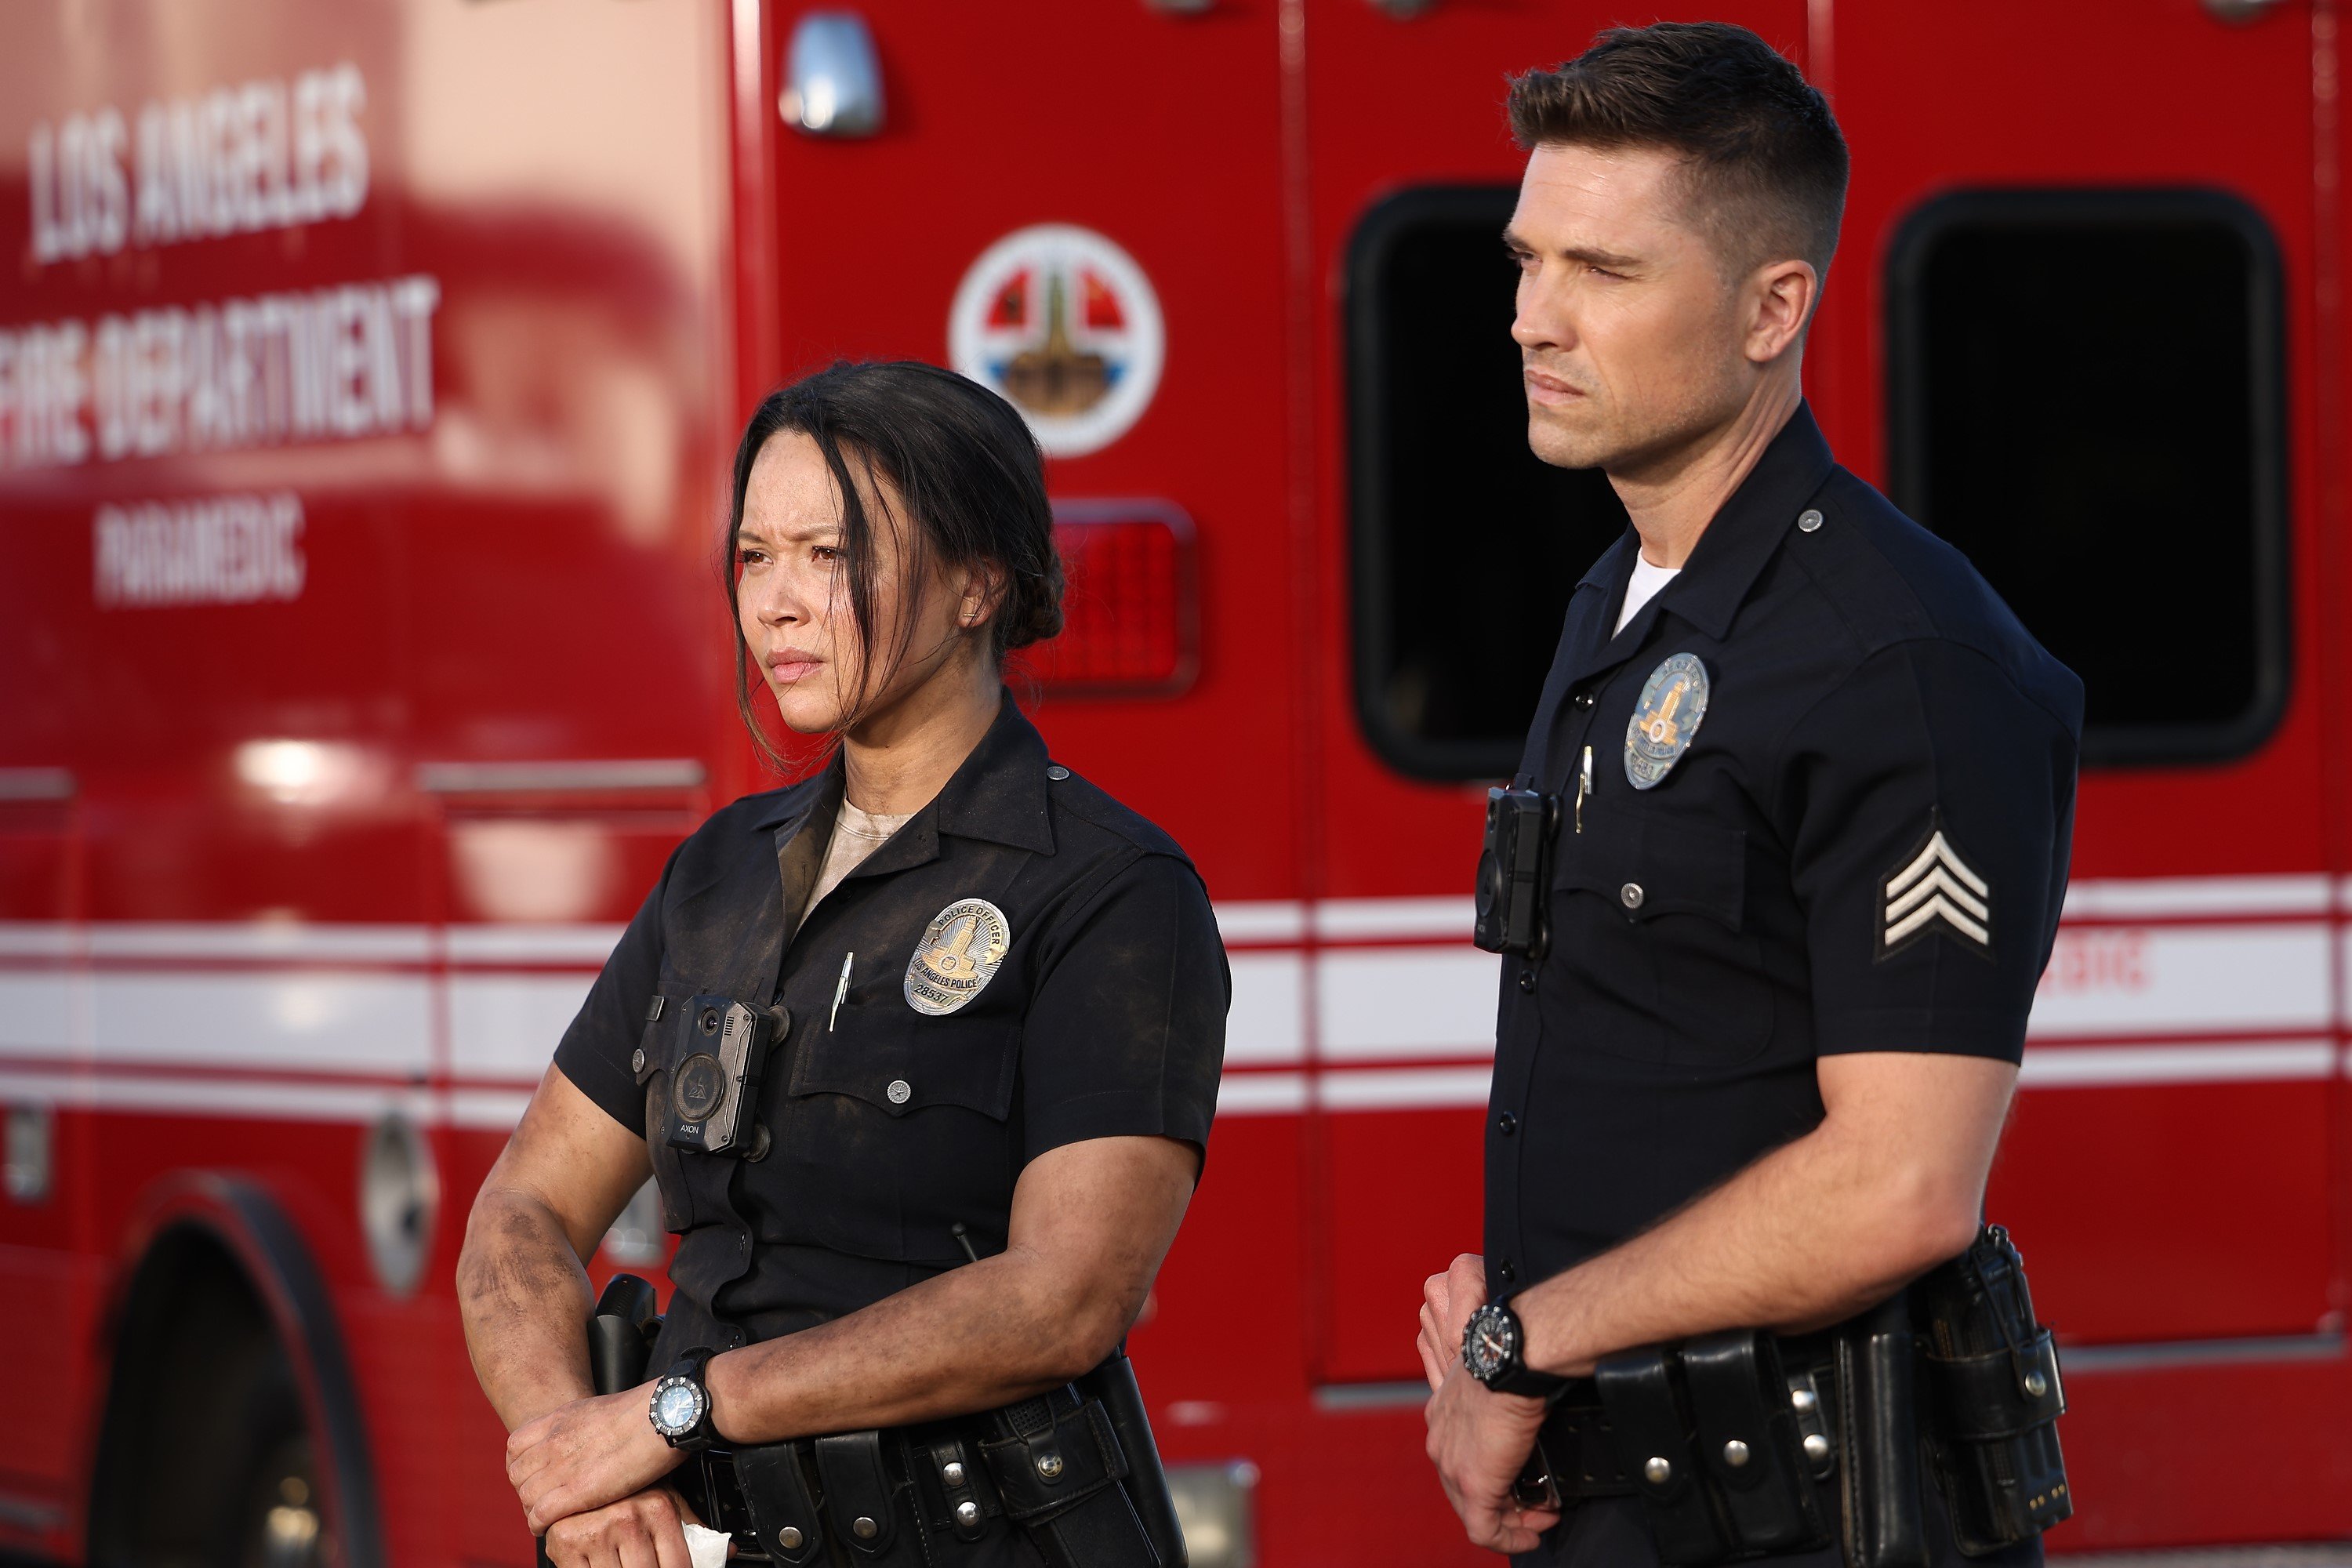 'The Rookie' Showrunner Reveals the Next Episodes Won't Be 'Easy' for